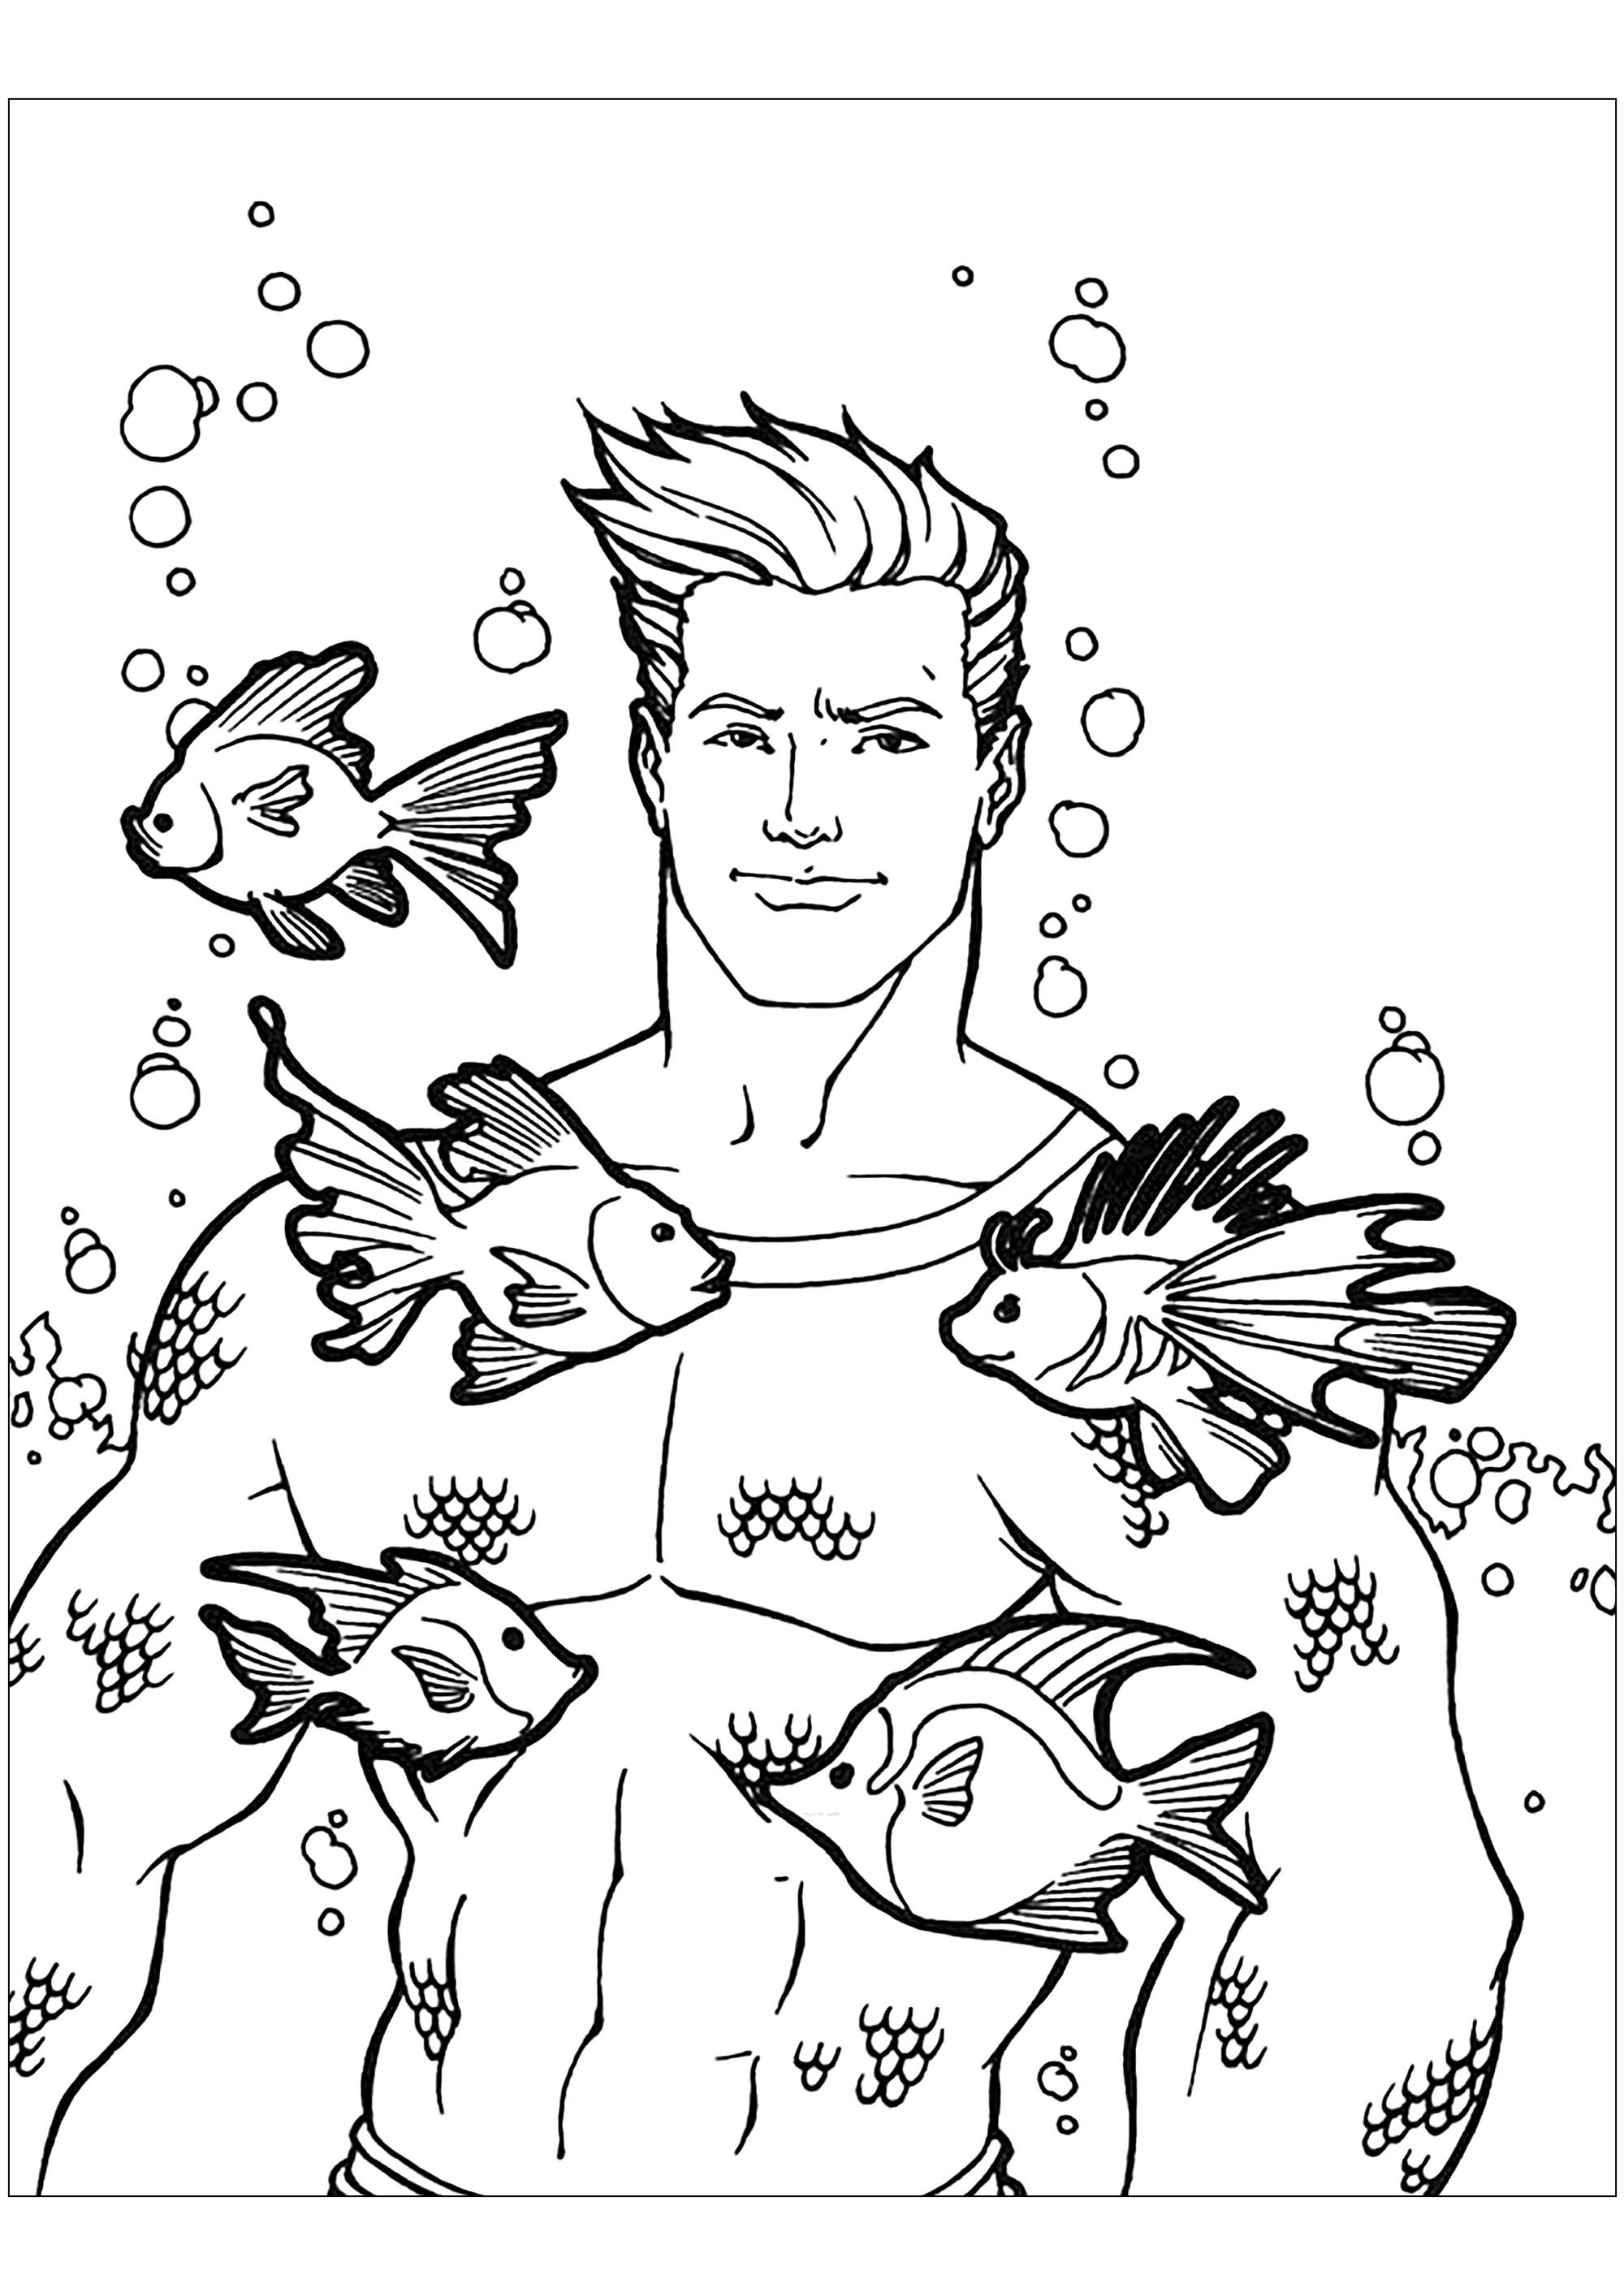 Free Aquaman coloring page to print and color